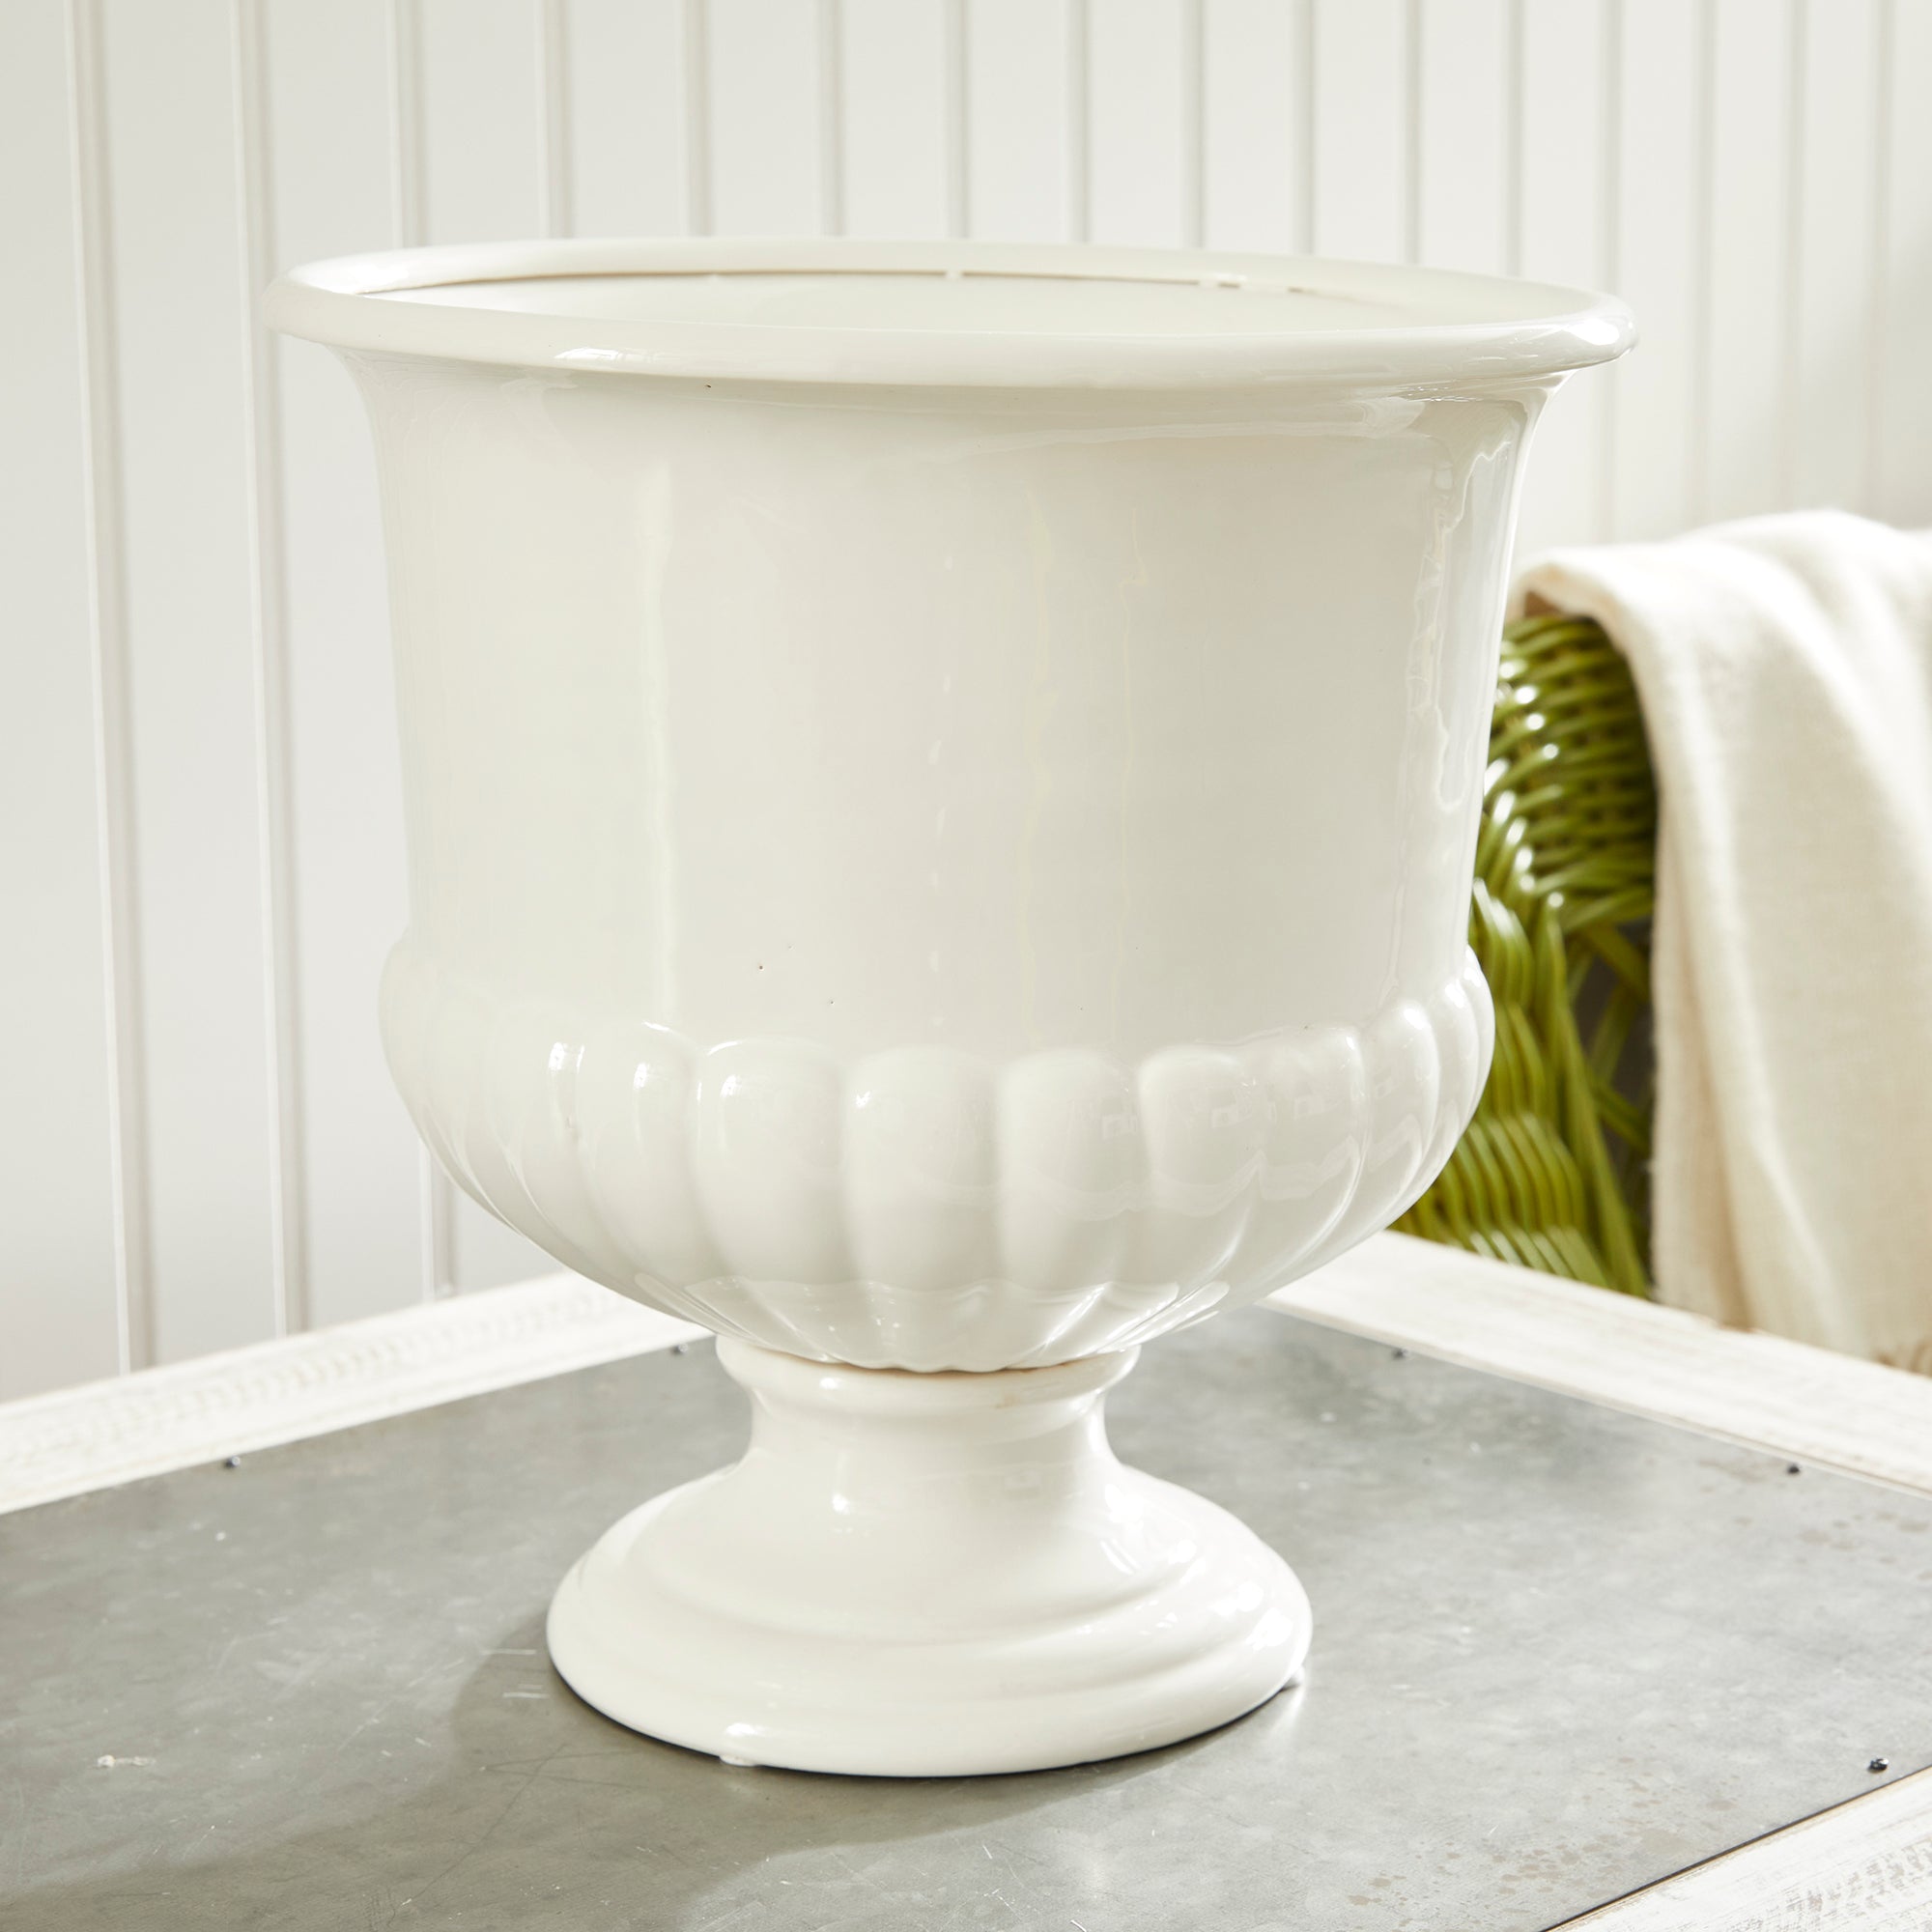 A real statement piece. The Mirabelle Pedestal Bowl is made in classic Italian style. A beautiful addition to any traditional to transitional space. Amethyst Home provides interior design, new construction, custom furniture, and area rugs in the Austin metro area.